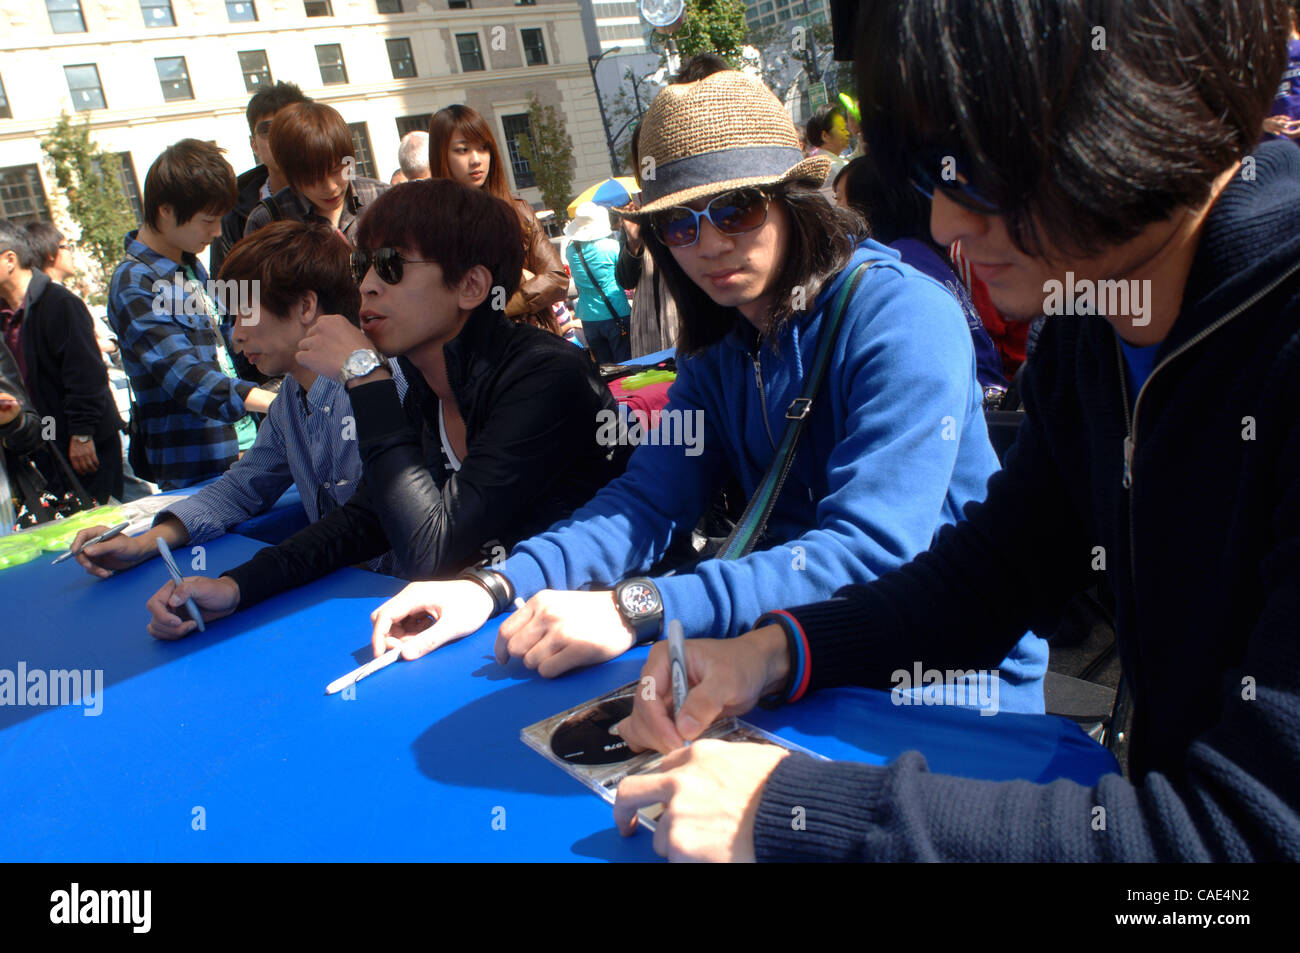 Sep 05, 2010 - Vancouver, British Columbia, Canada - Members of Taiwanese band '1976' signing autographs after their performance at Telus TaiwanFest 2010 in Vancouver. Last spring, '1976' was invited as the opening guest for the Oasis Live Forever Tour in Taipei, the first Taiwanese band ever to per Stock Photo